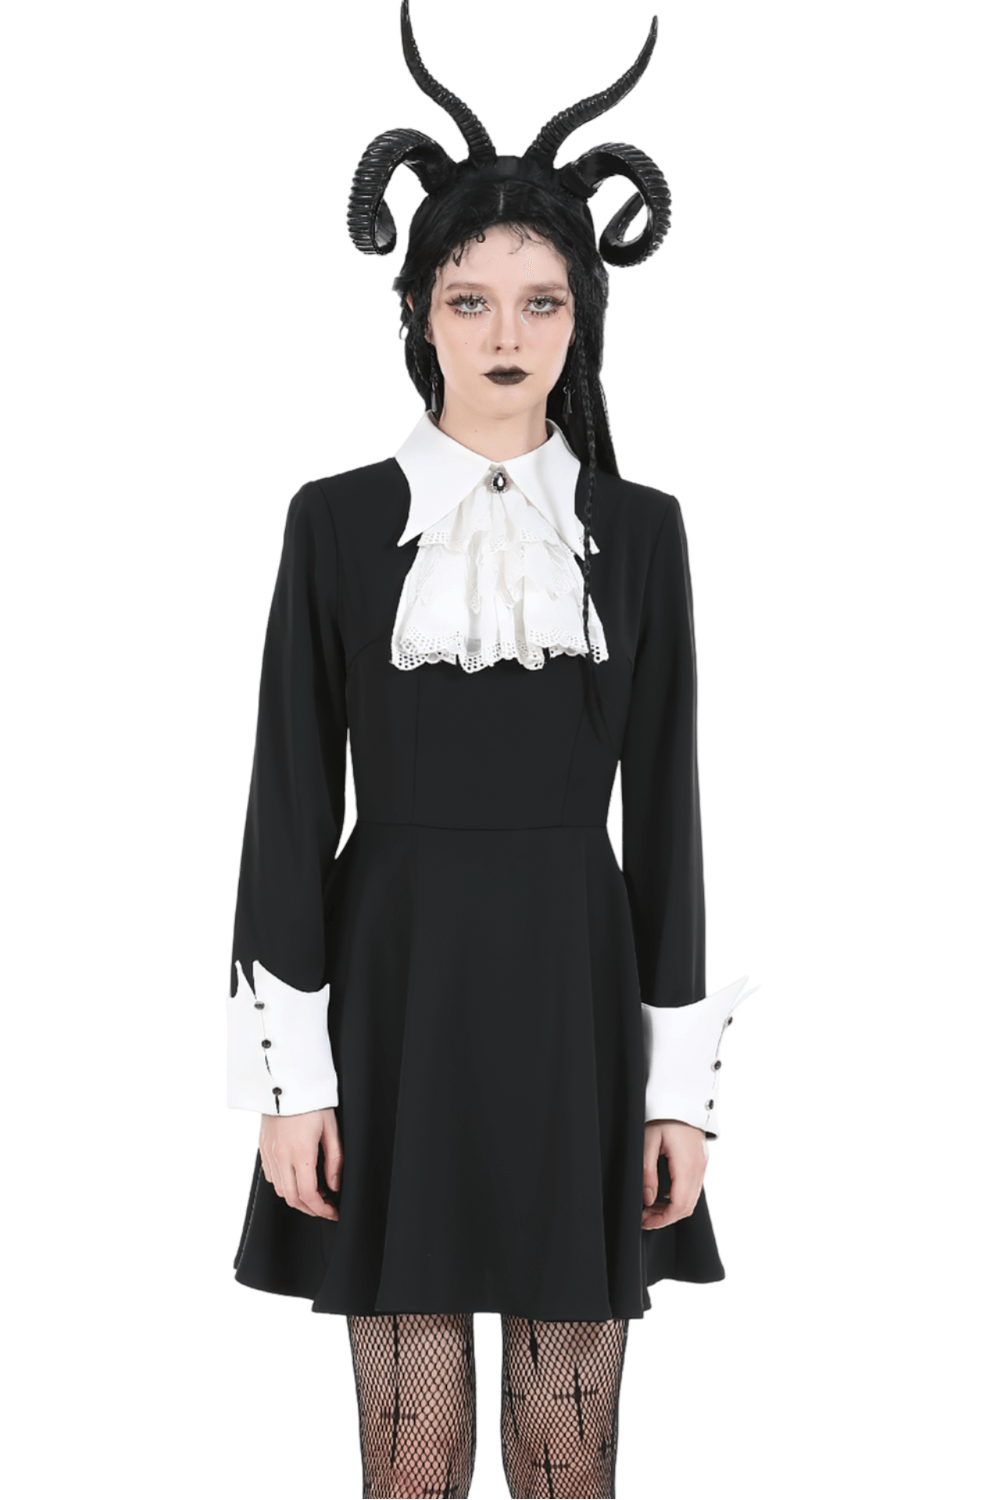 Black Victorian Dress with White Collar and Cuffs